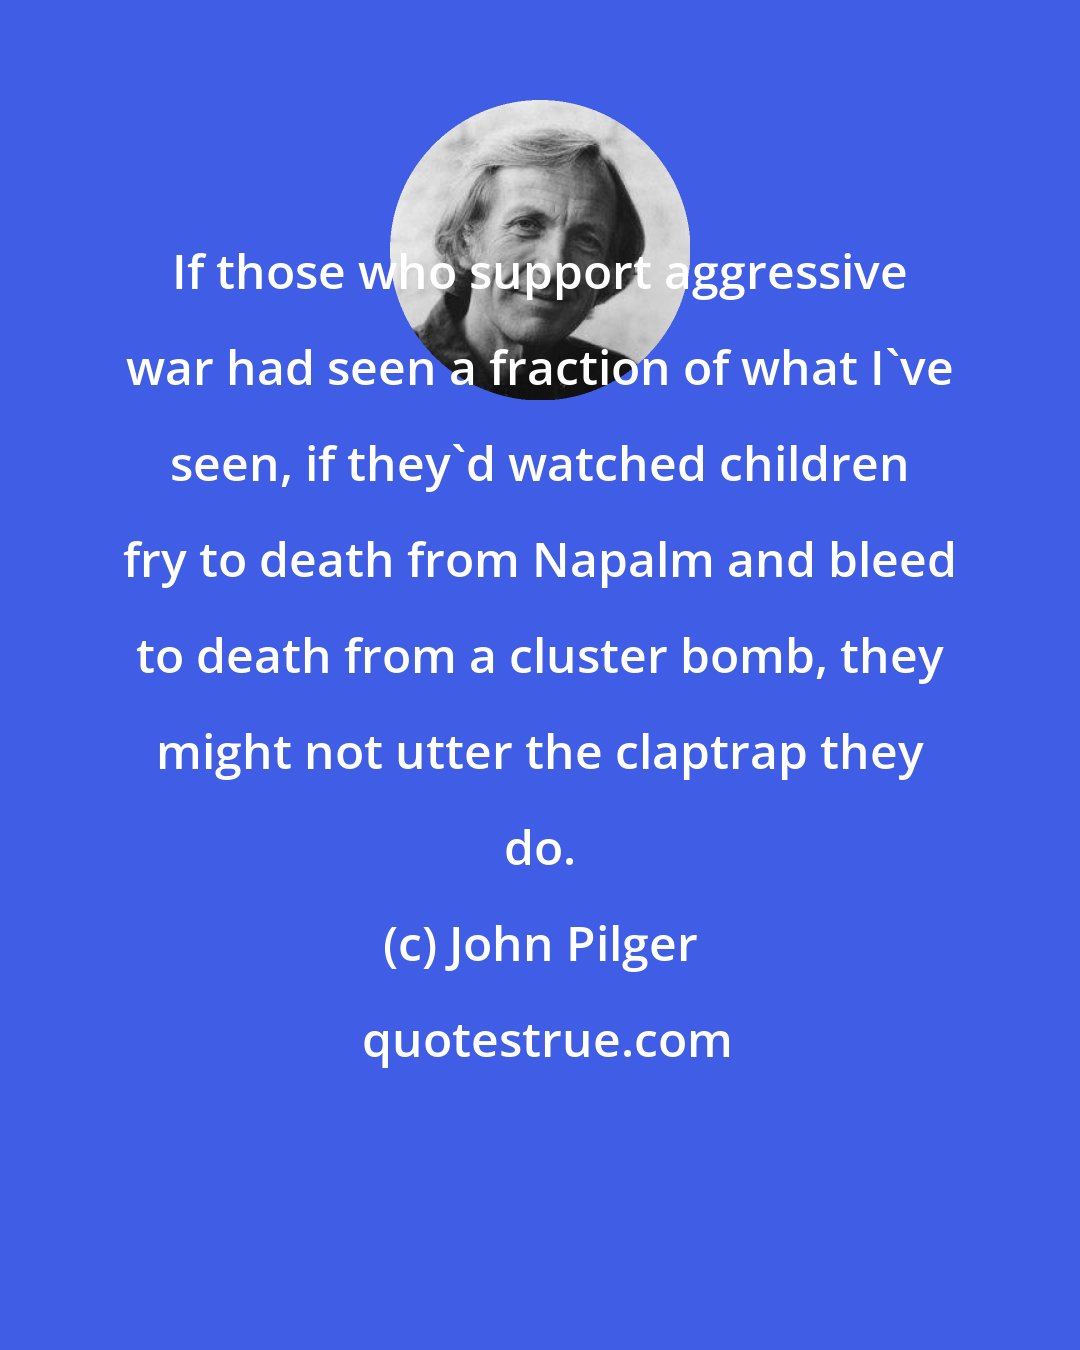 John Pilger: If those who support aggressive war had seen a fraction of what I've seen, if they'd watched children fry to death from Napalm and bleed to death from a cluster bomb, they might not utter the claptrap they do.